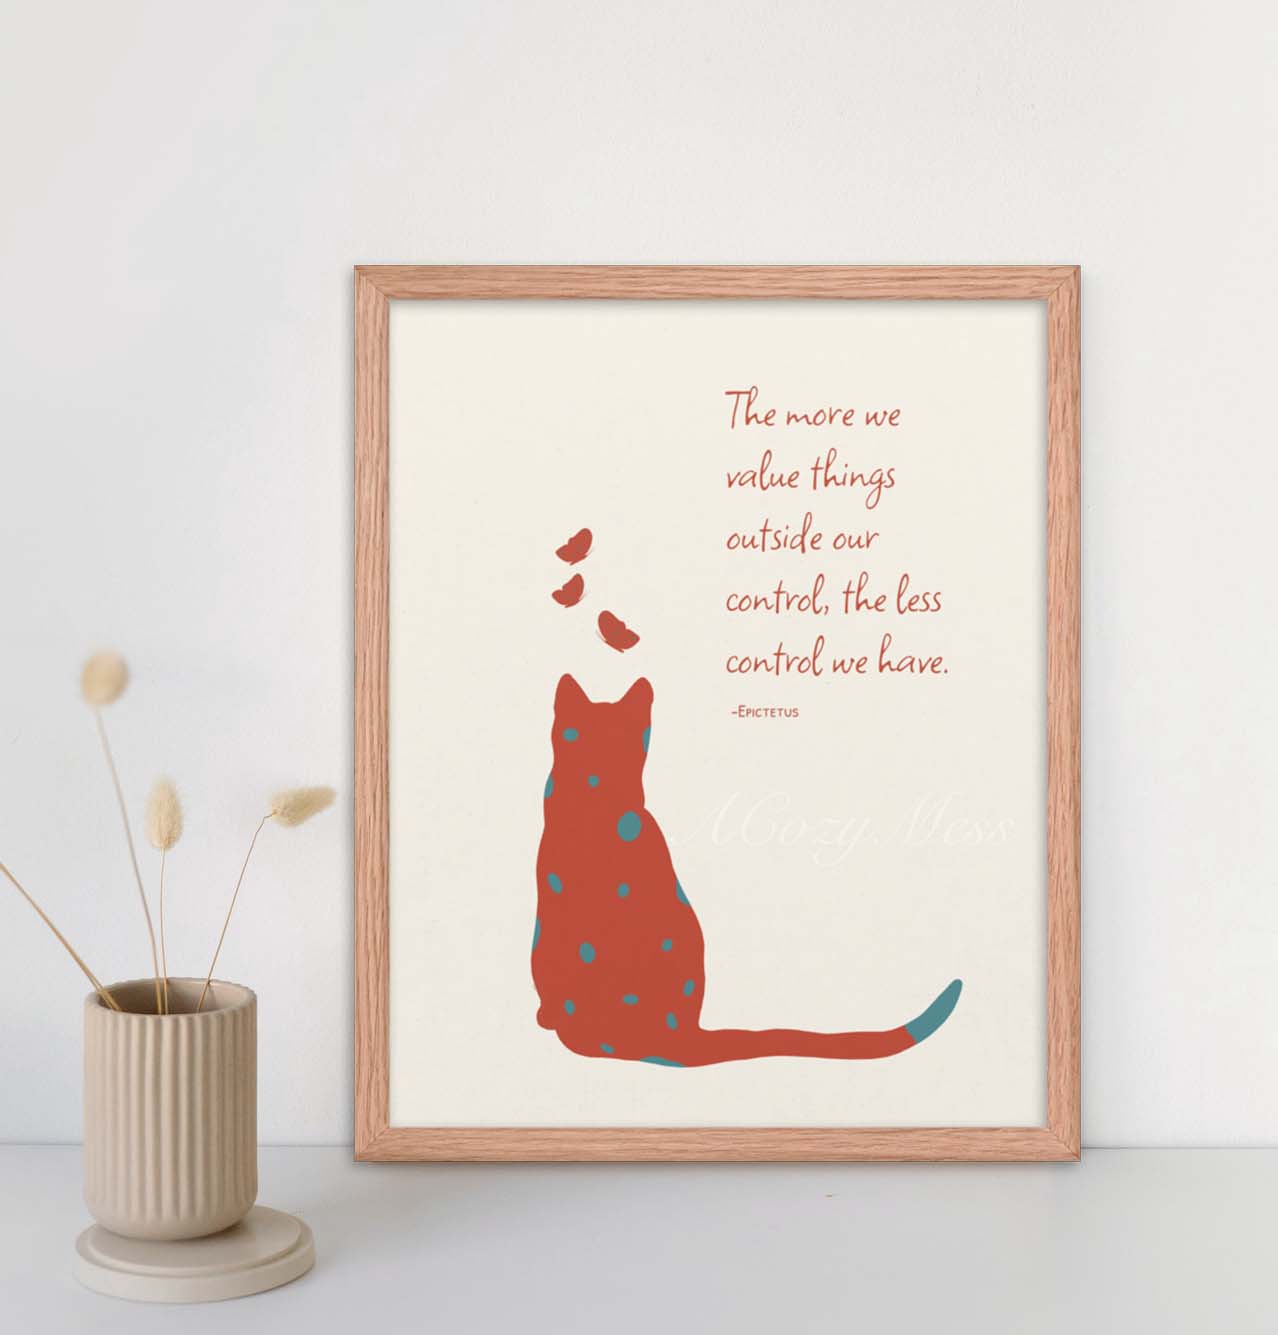 Epictetus Stoic Quote Poster, Epictetus Stoic Quote Poster, with a cat & butterflies illustration in red & blue on white background in oak frame.